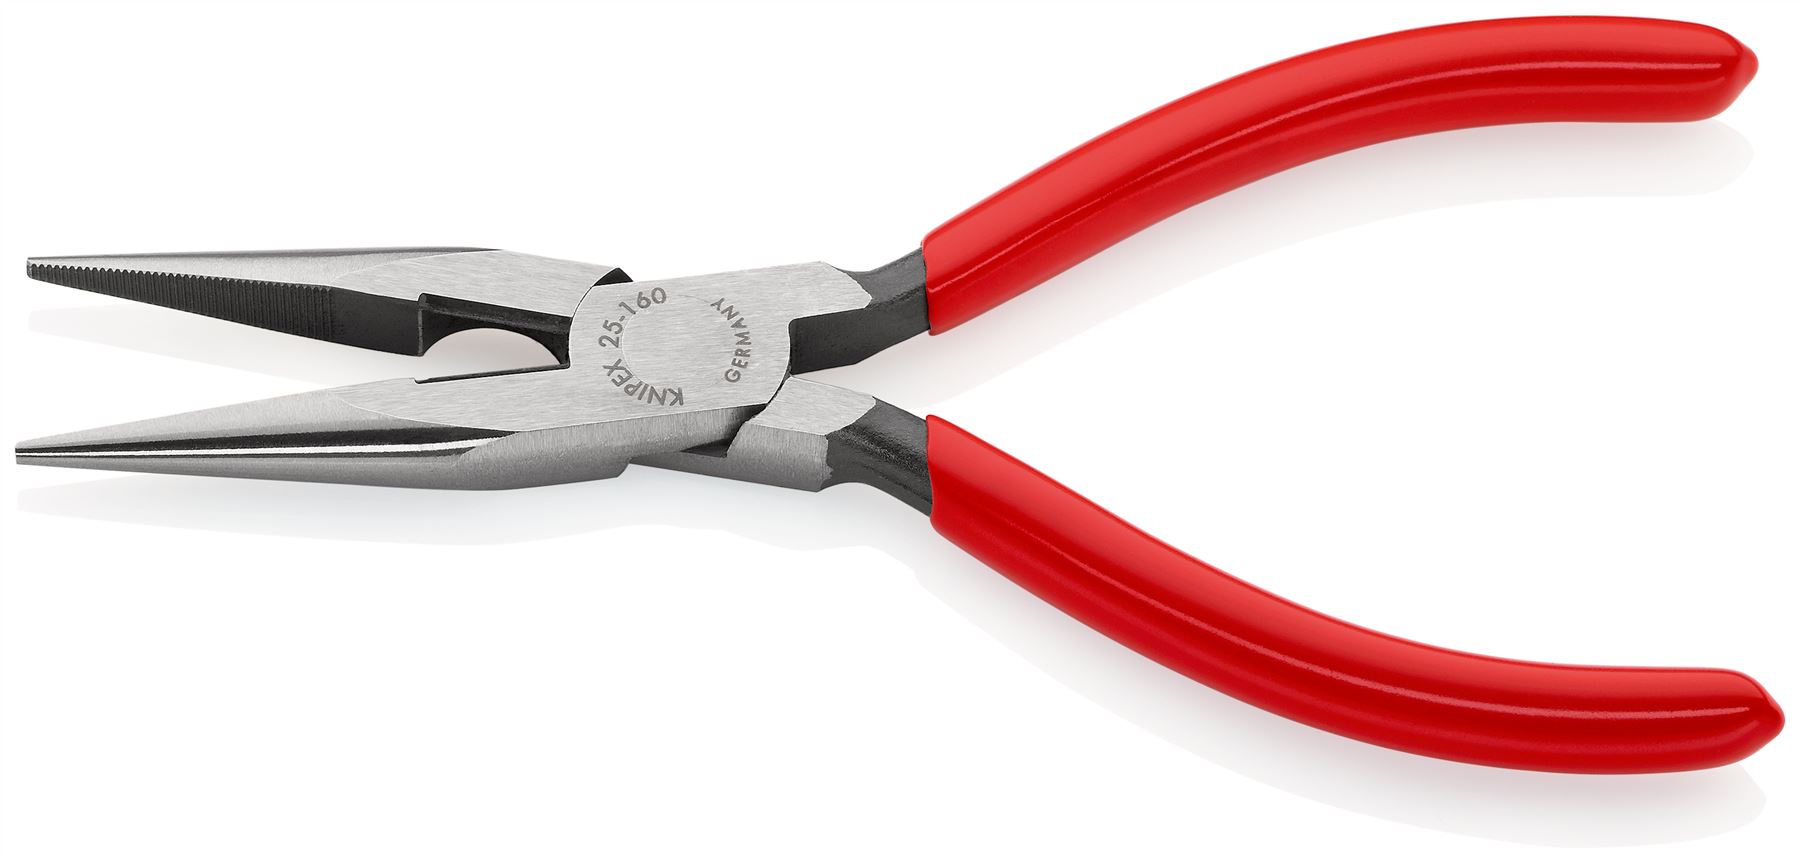 Knipex Gripping Pliers 160mm Snipe Nose Side Cutting Radio Pliers 25 01 160